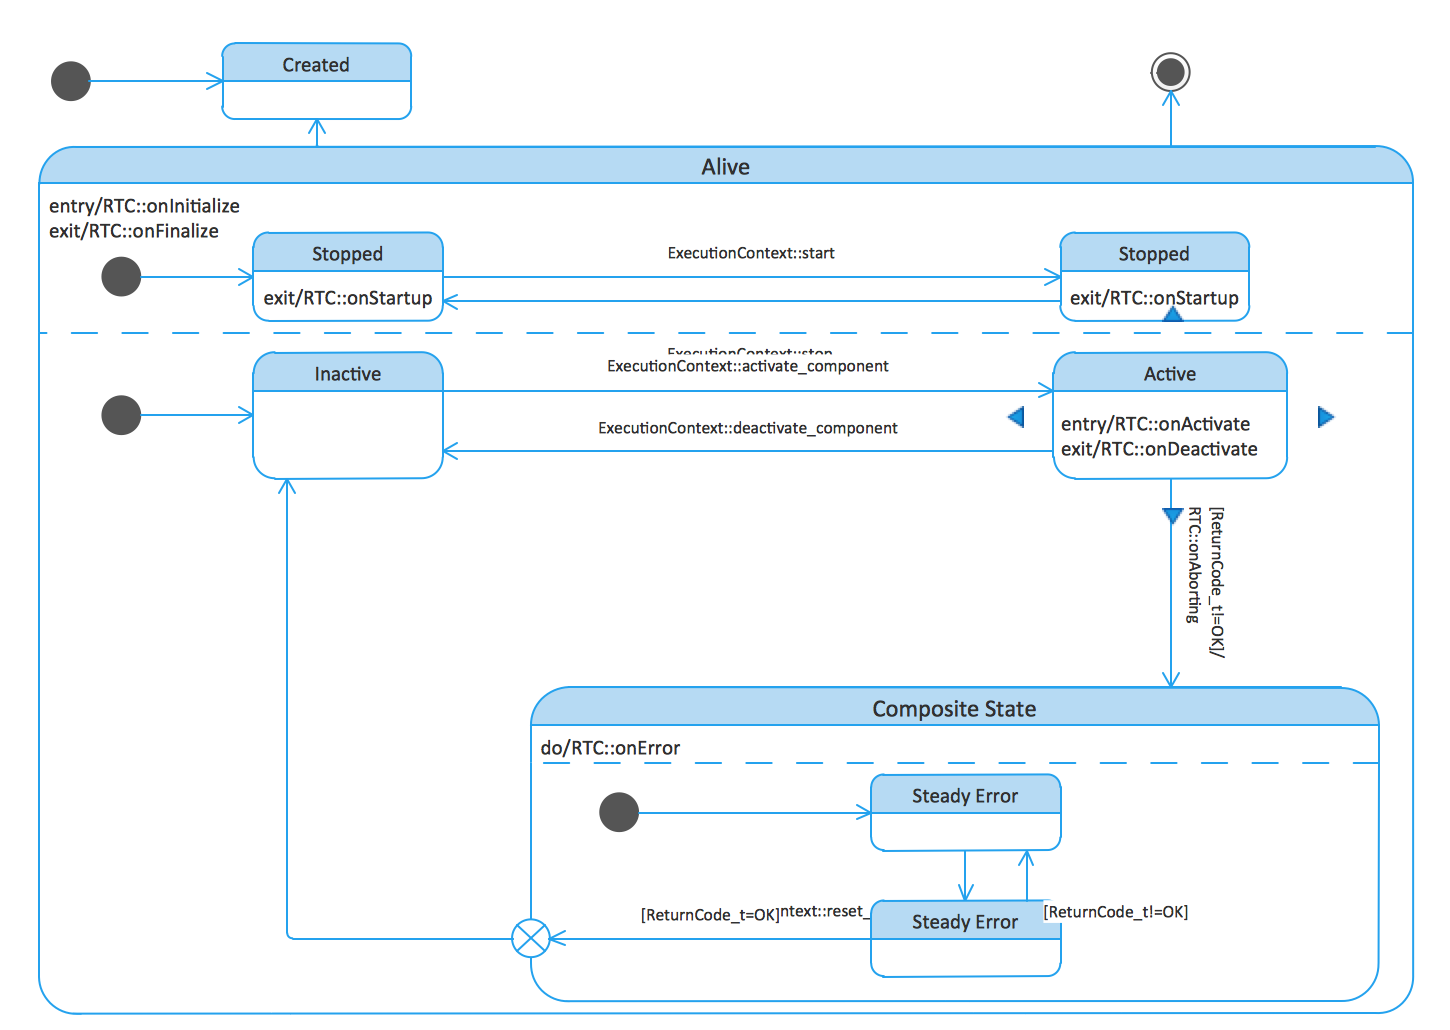 UML State Machine Diagrams. State transitions of RT component